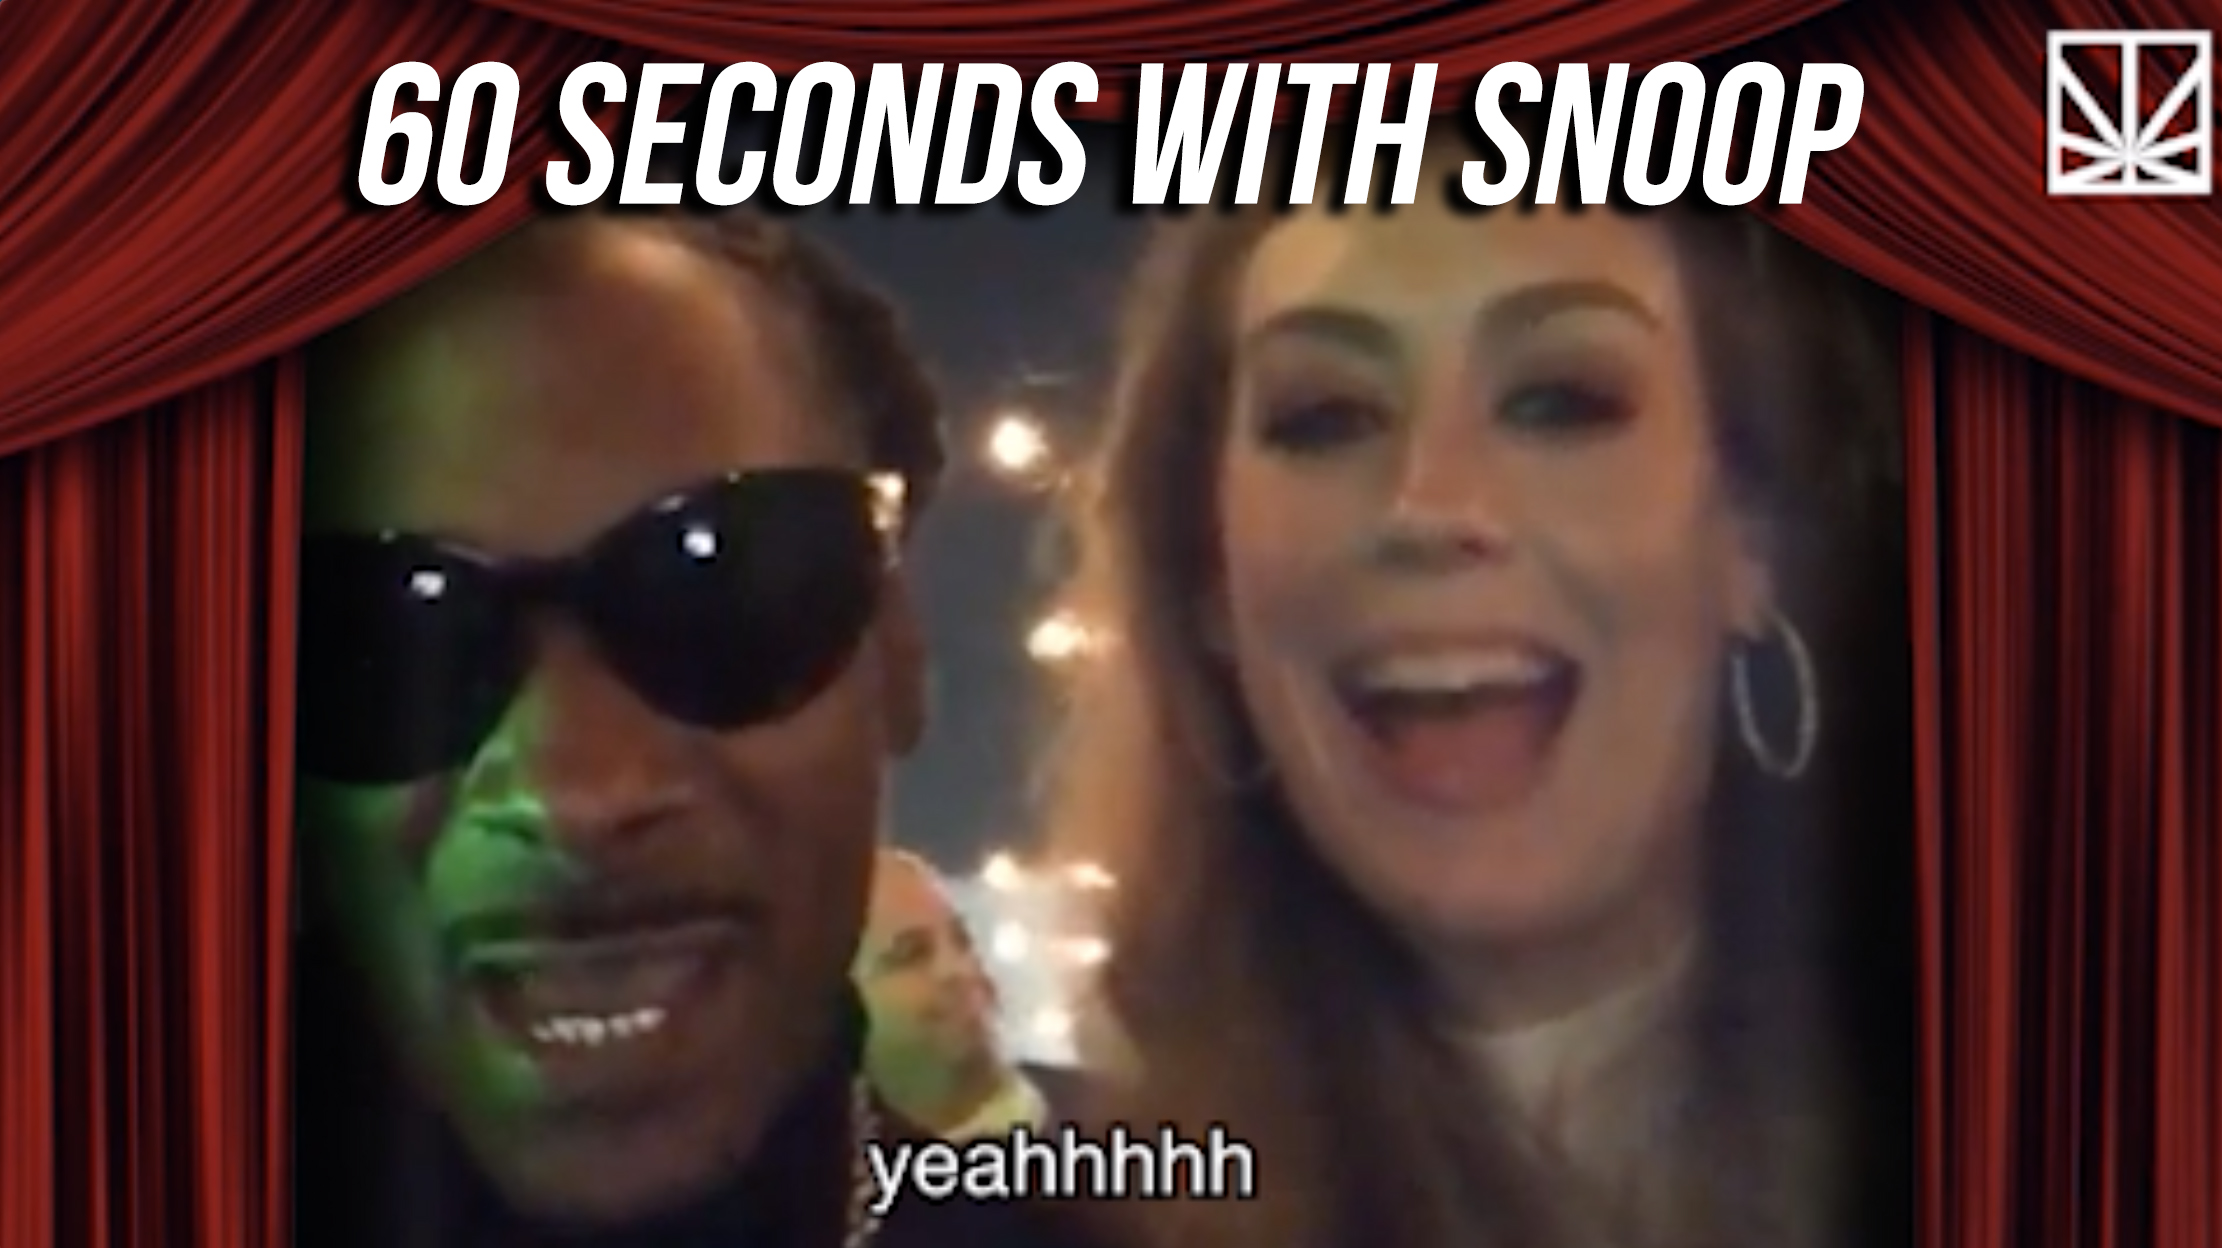 Breanna Stewart, Michael Cooper, and nephew Urijah Faber | 60 seconds with Snoop.